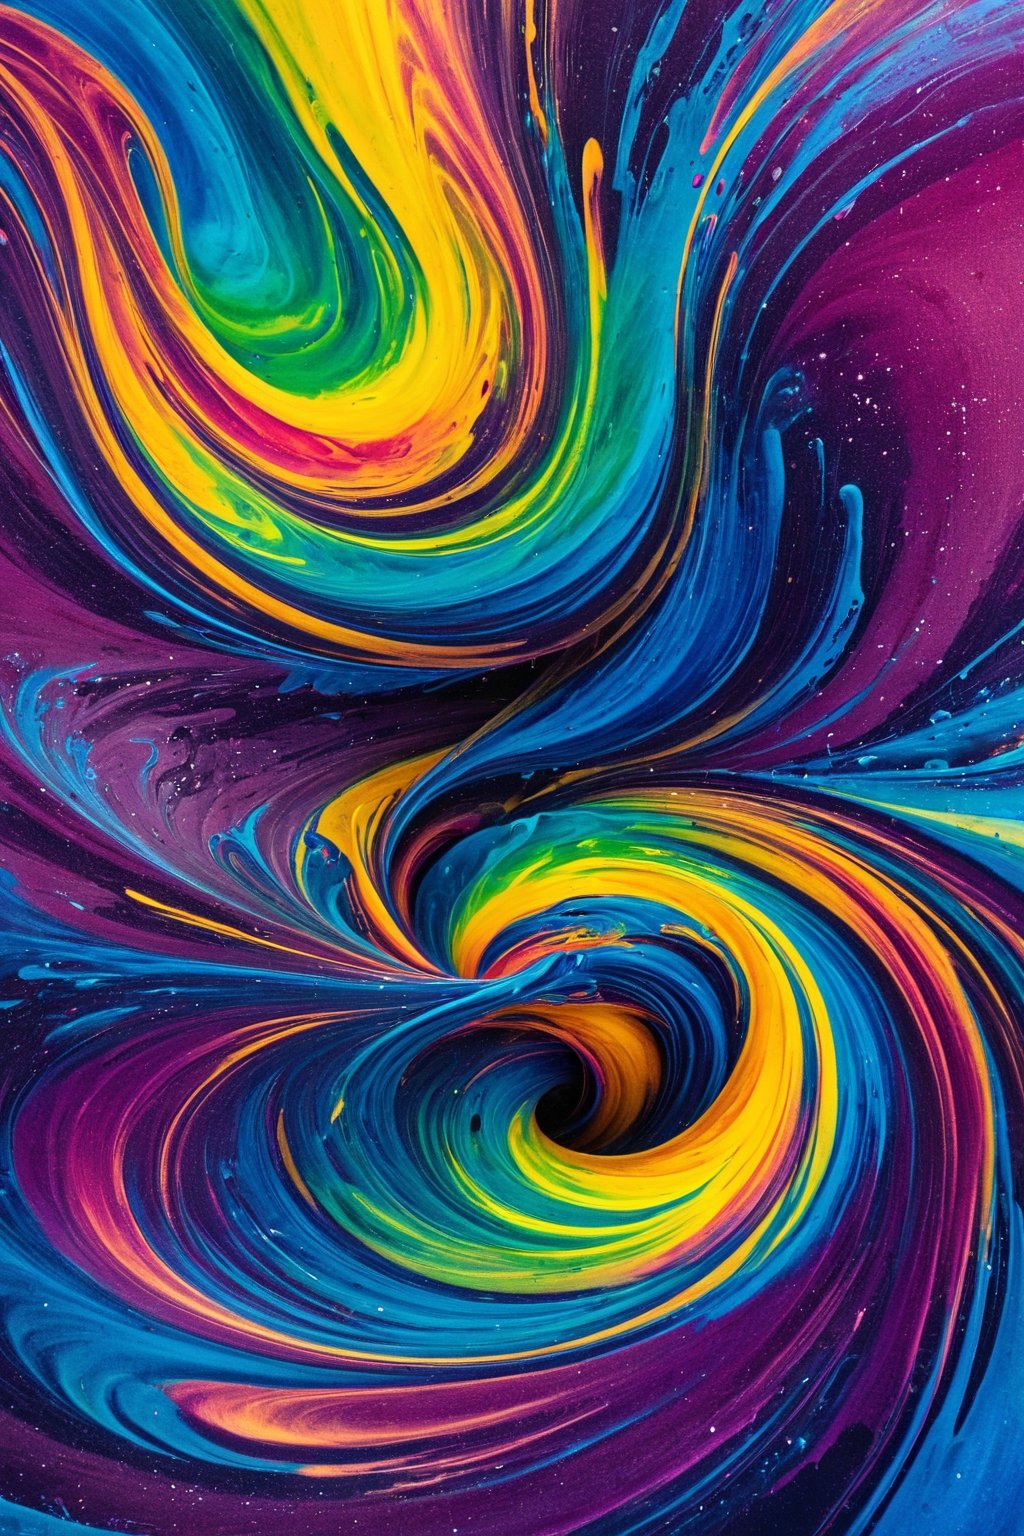 A swirling tornado of many bright ink colors